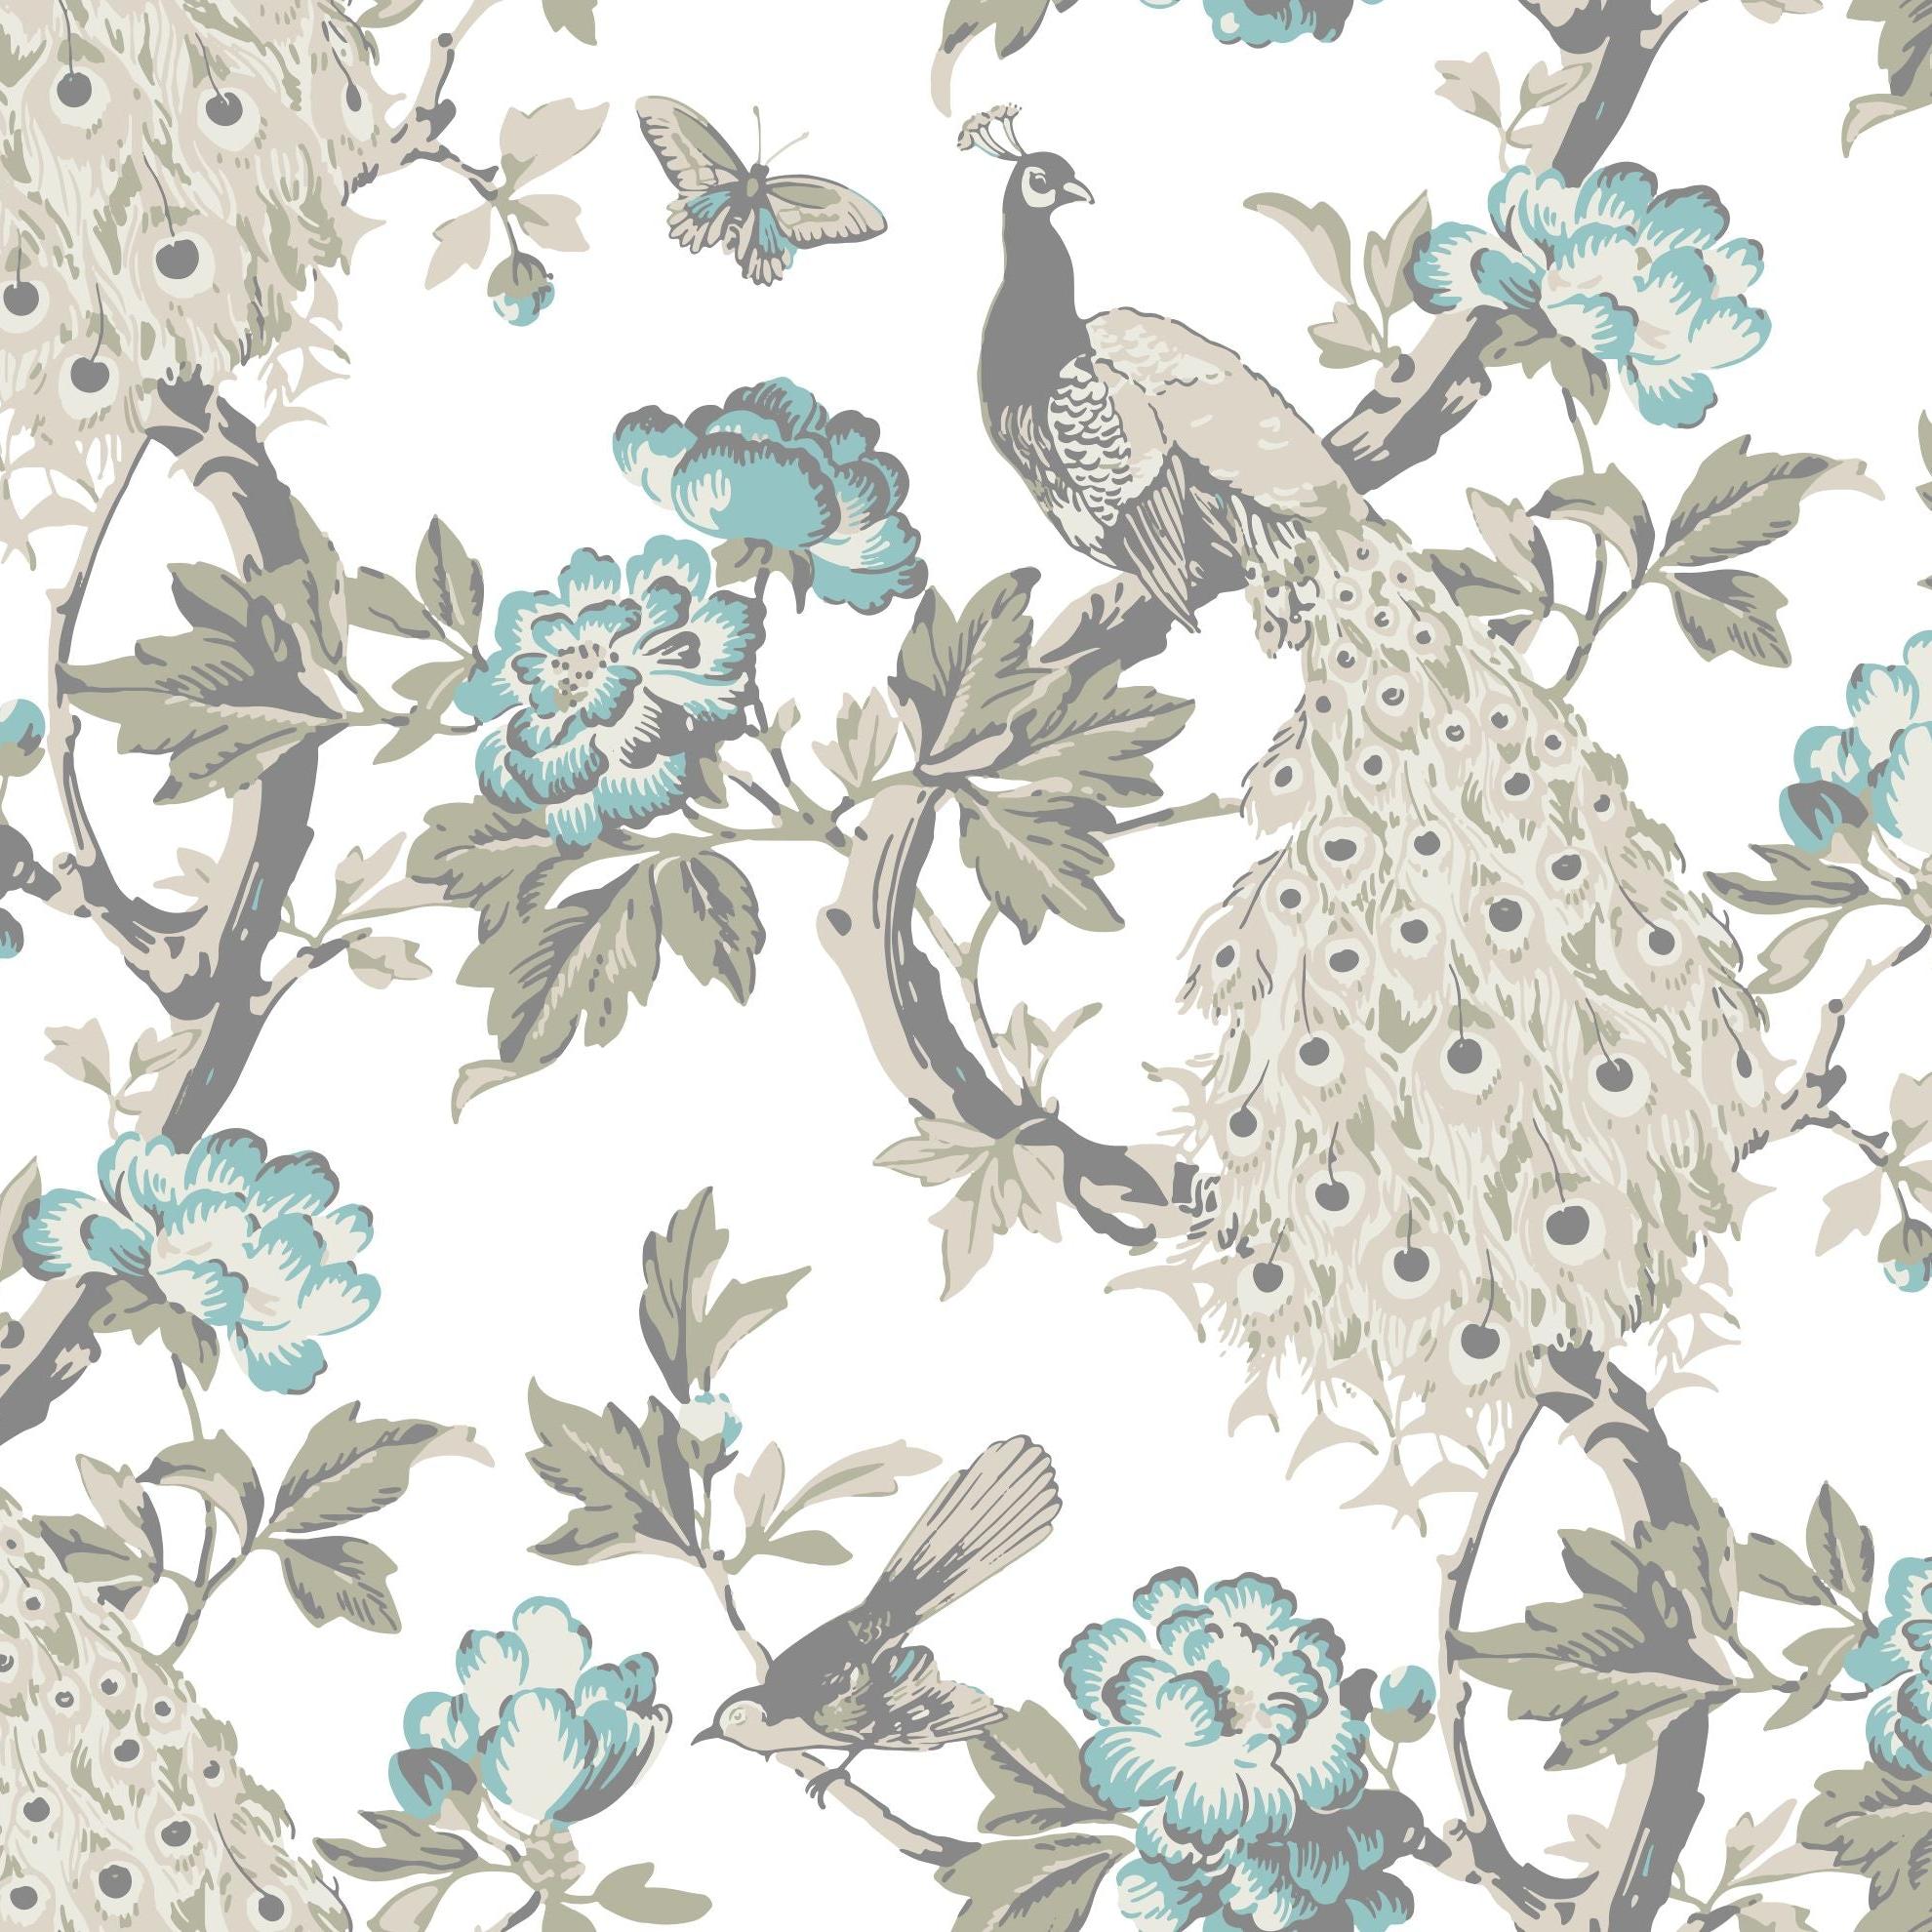 Hera (Blue) Wallpaper by Wall Blush SG02, elegant design in a living room setting, showcasing floral and peacock pattern.
